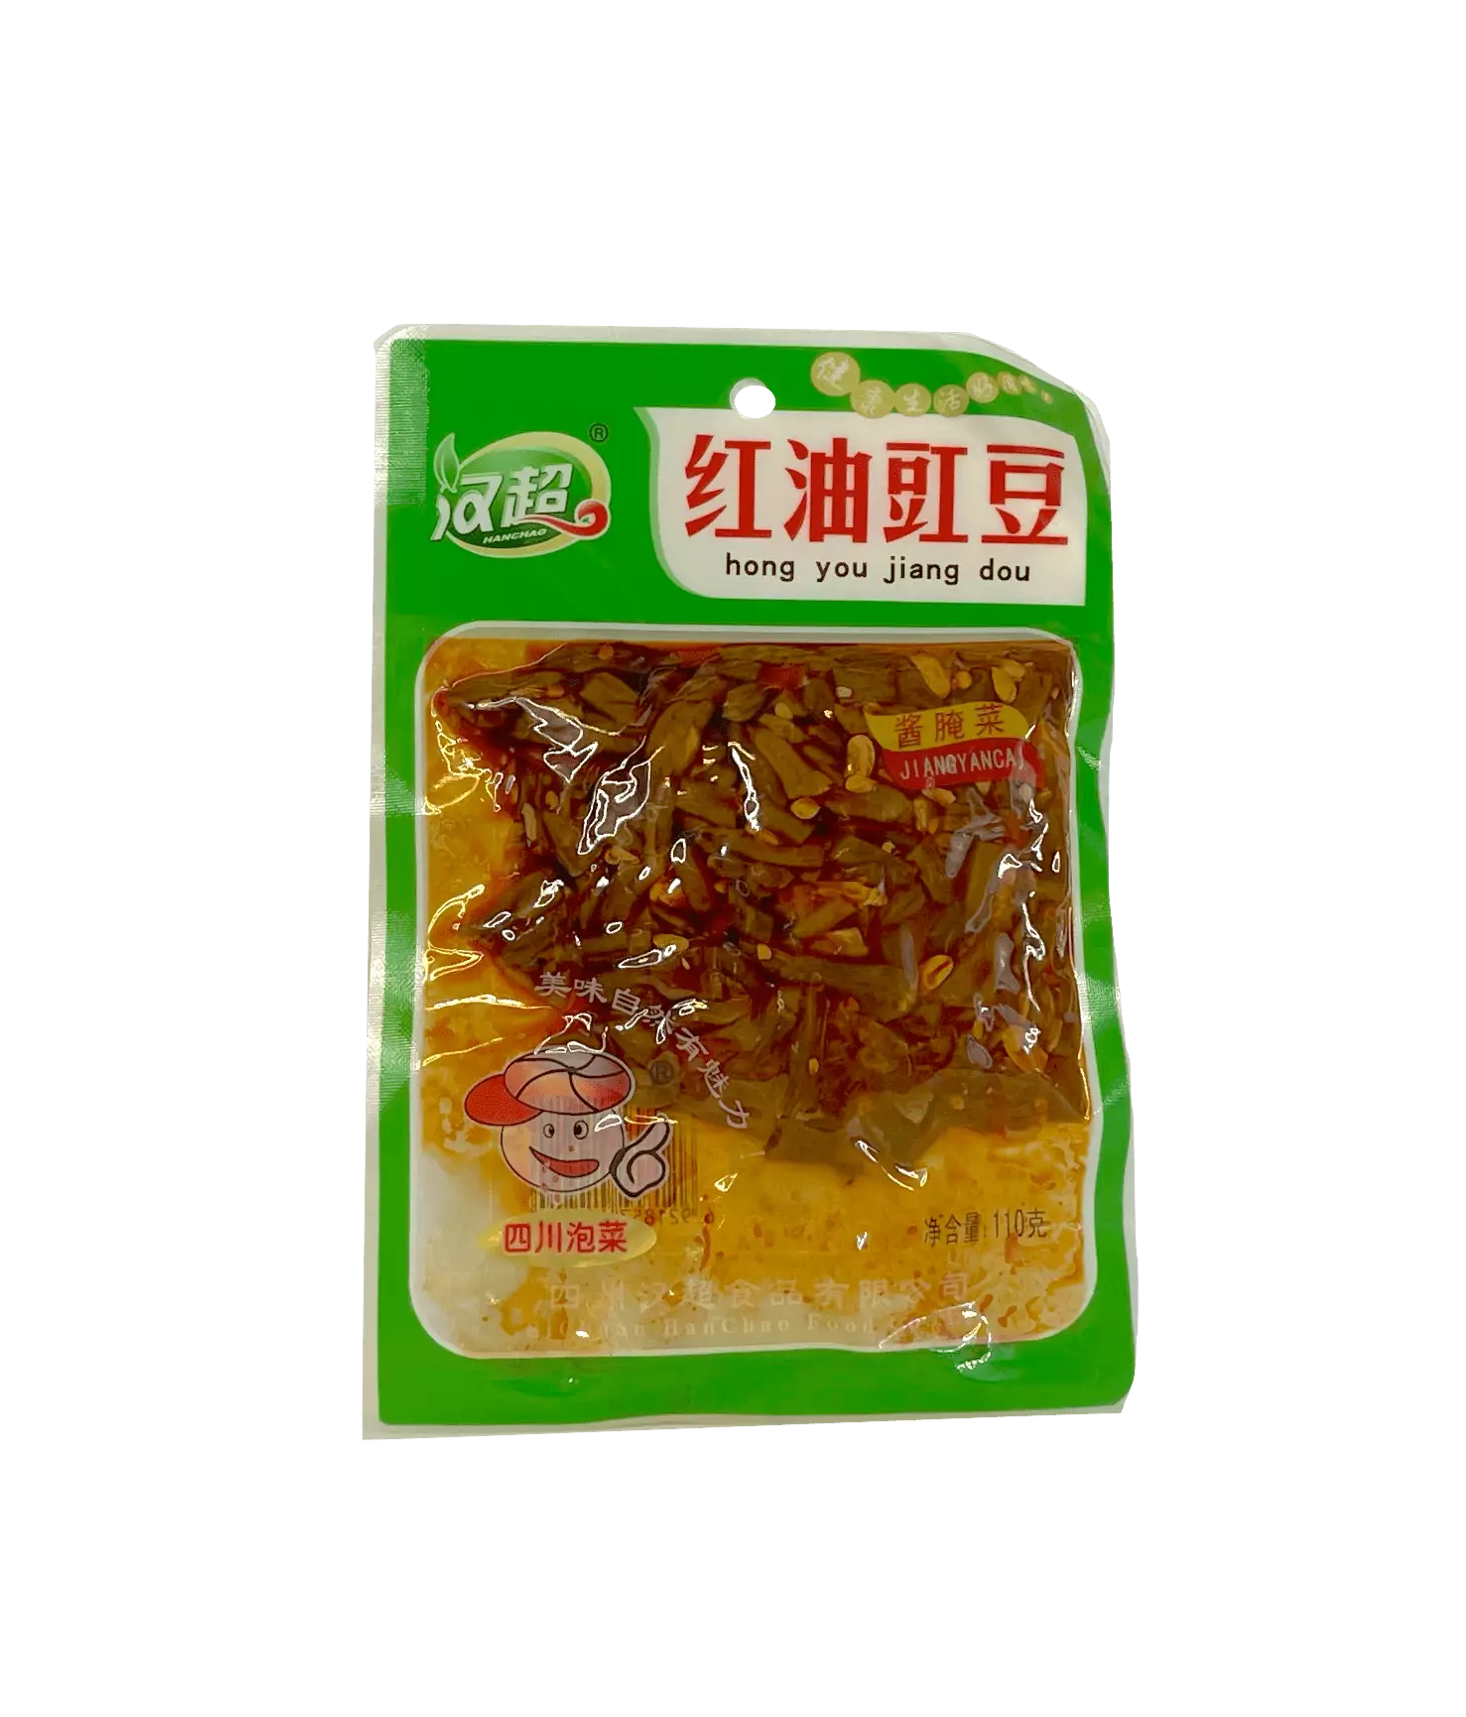 Pickled Long Beans With Chili in oli Flavor 100g Han Chao China